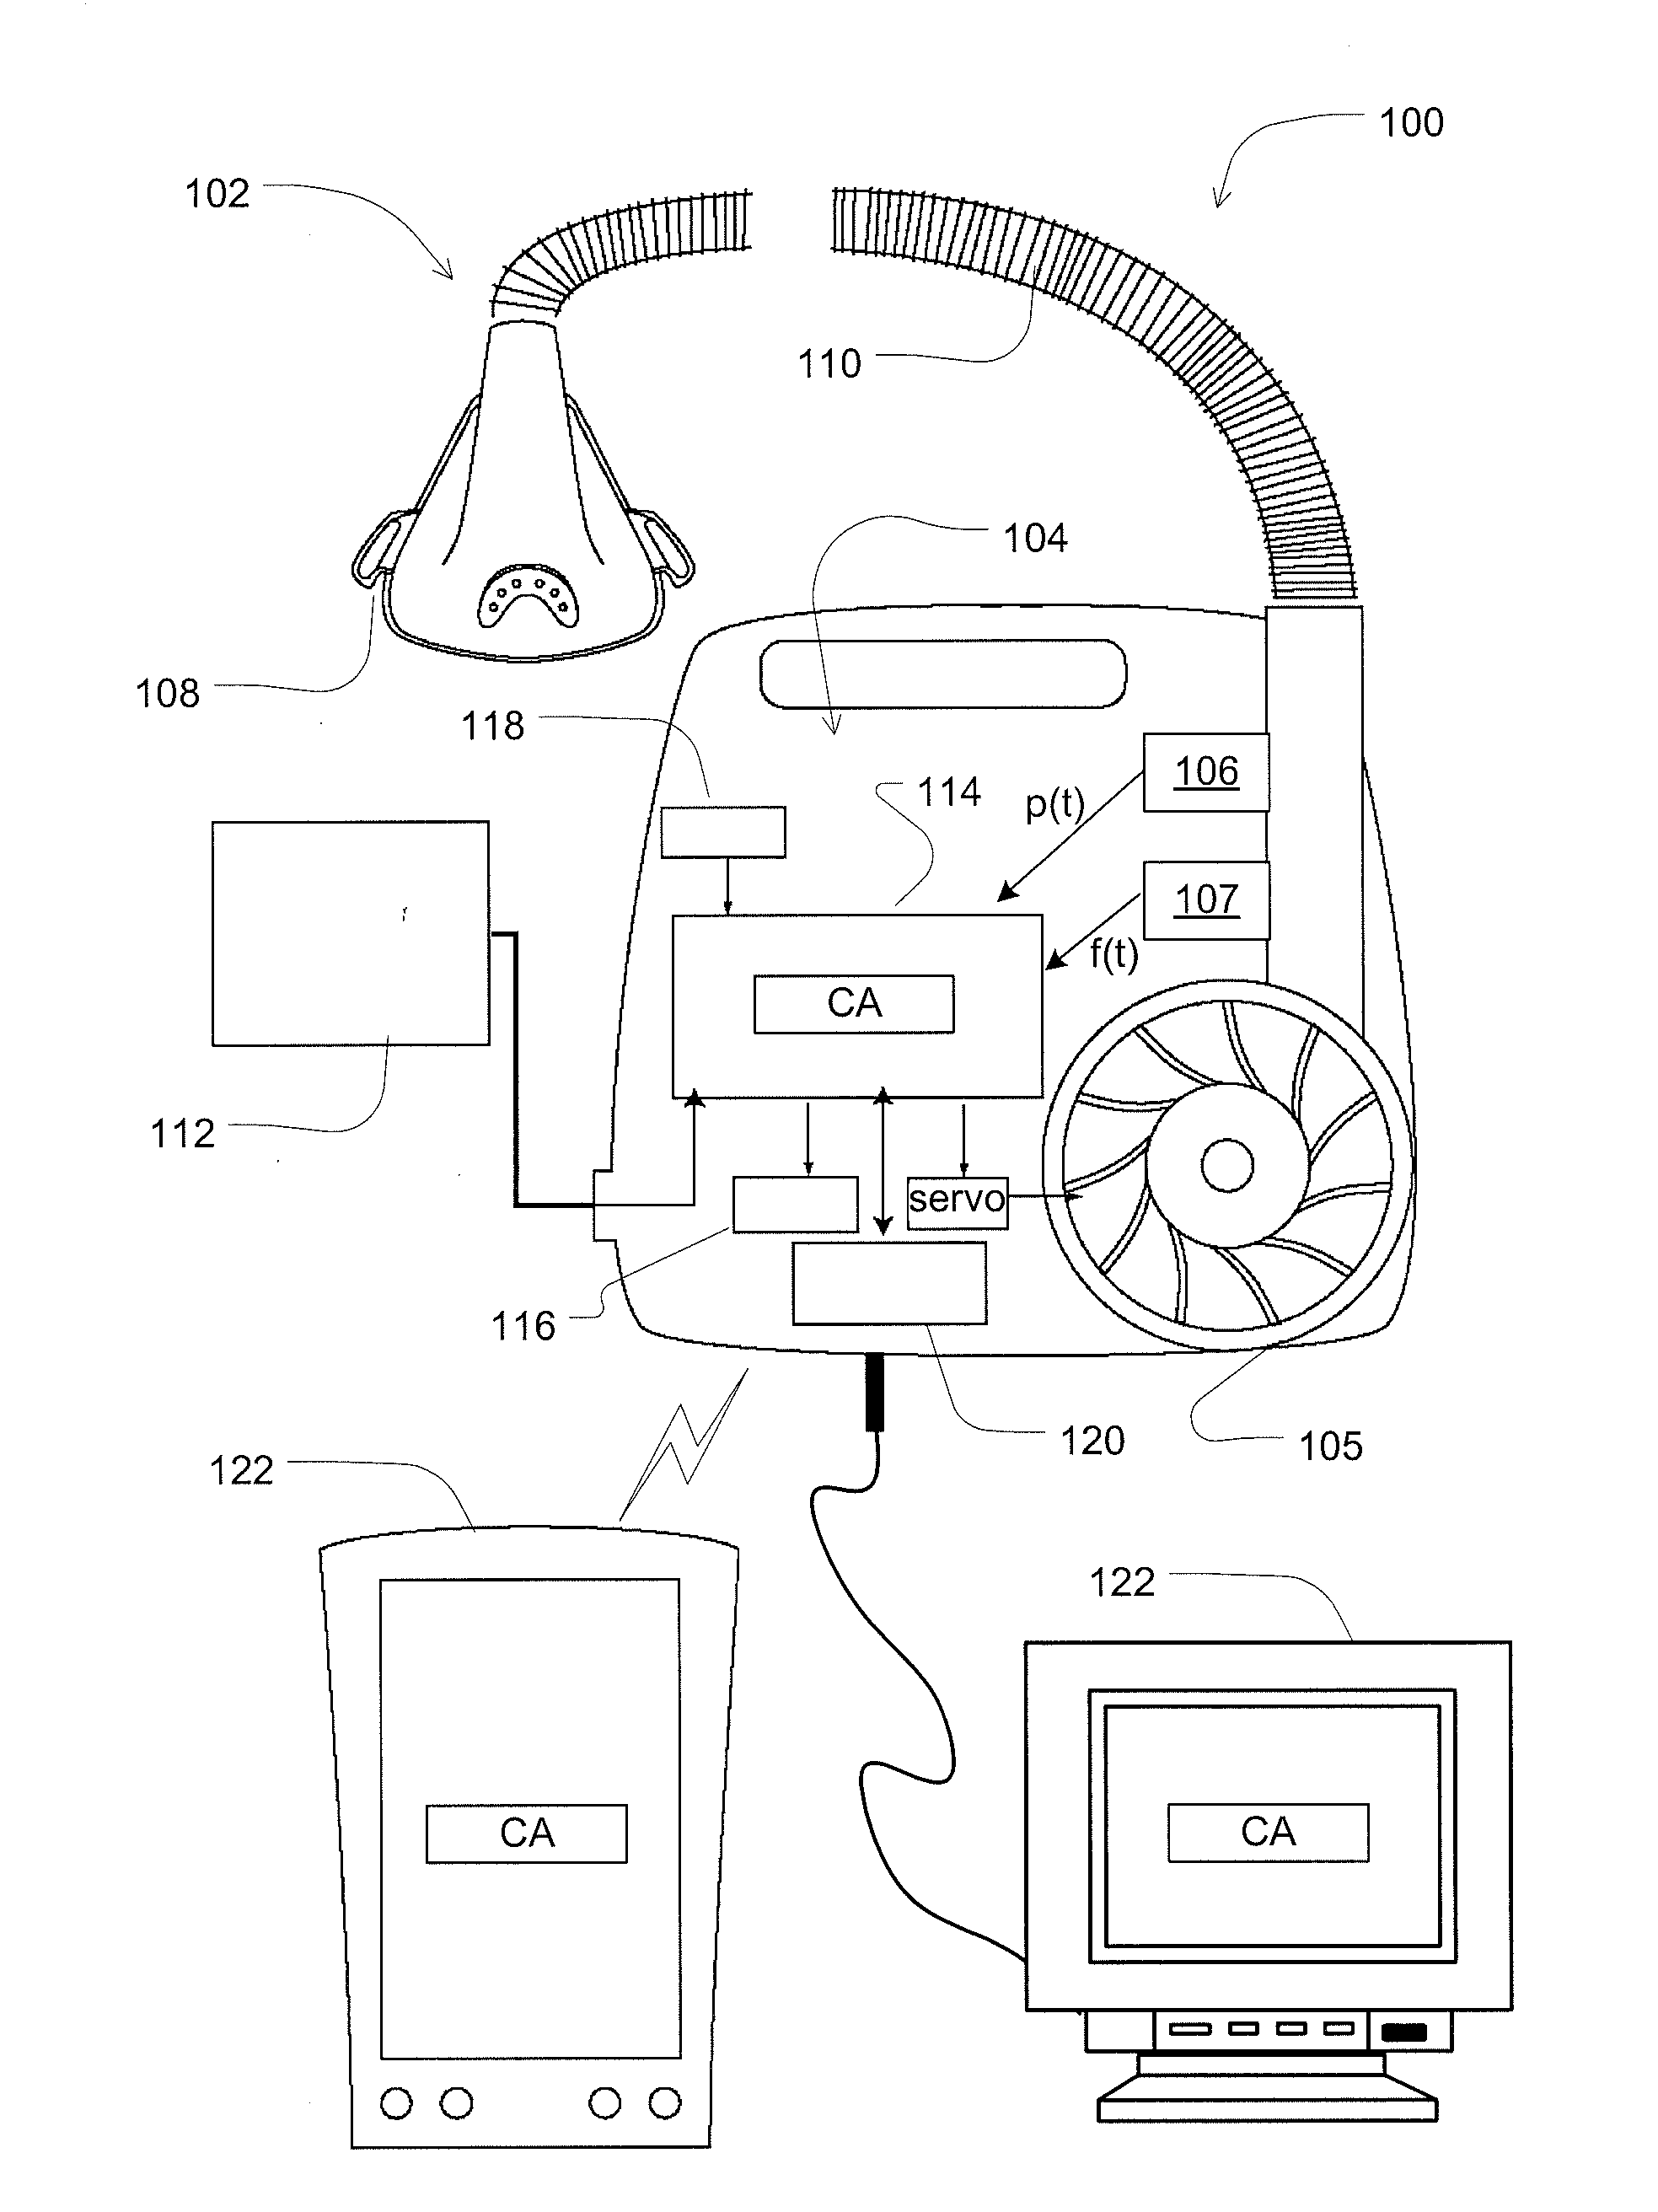 Methods and apparatus for monitoring and treating respiratory insufficiency